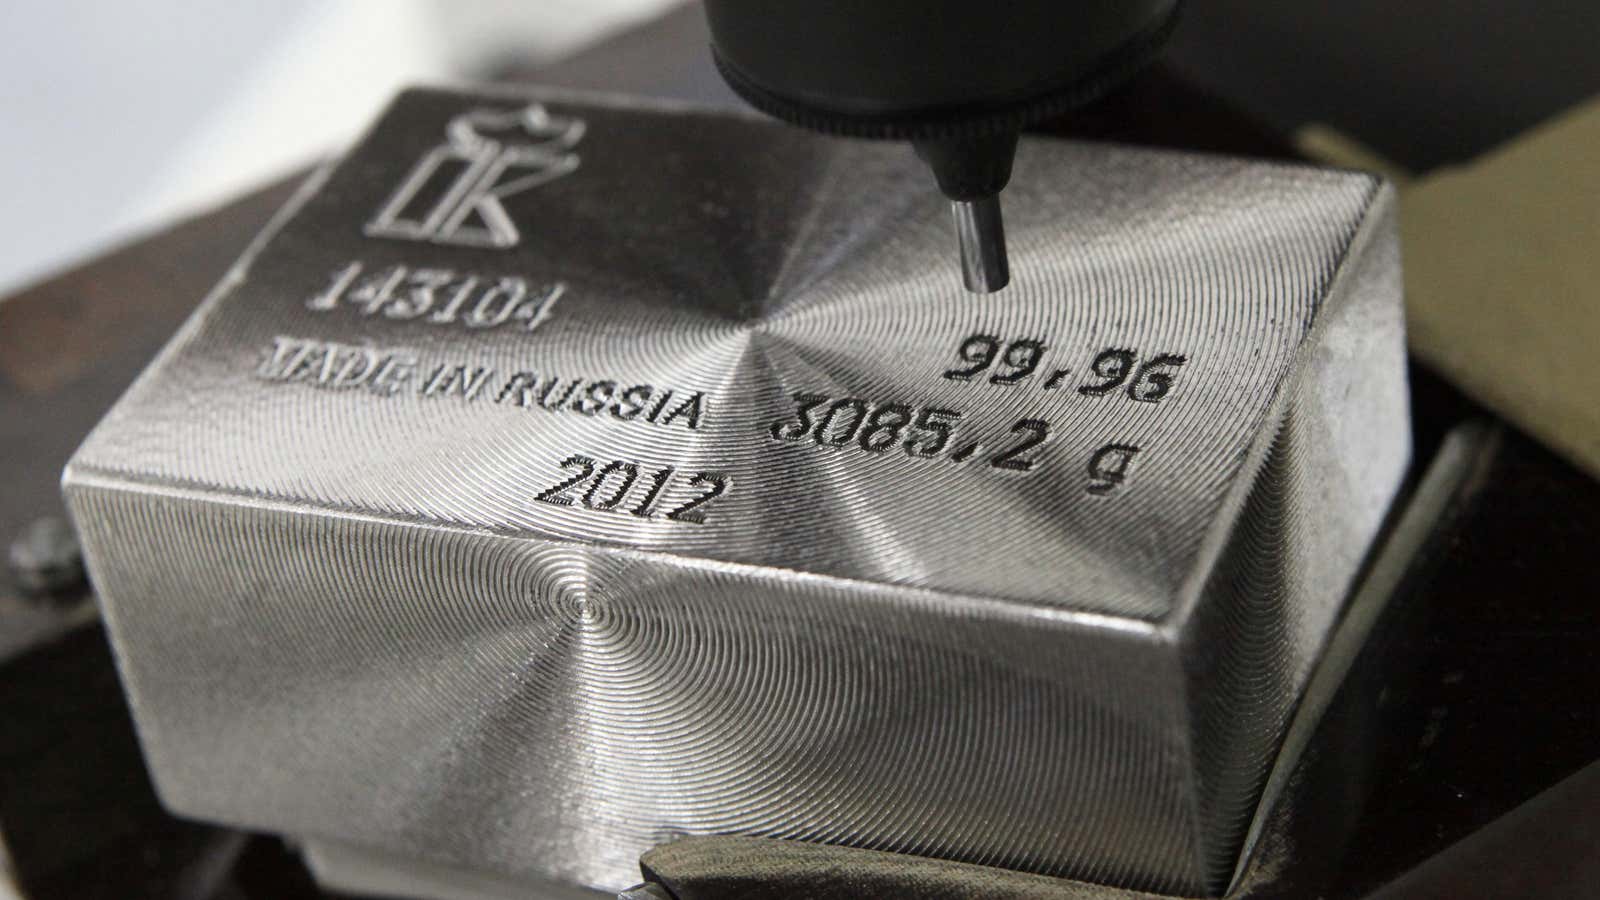 A machine engraves information on an ingot of 99.96 percent pure palladium at the Krastsvetmet nonferrous metals plant in Russia’s Siberian city of Krasnoyarsk April 12, 2012. Krastsvetmet is one of the world’s largest players in the precious metals industry.  REUTERS/Ilya Naymushin  (RUSSIA)  FOR RPA ONLY (BUSINESS COMMODITIES) – GM1E84C1KNC01